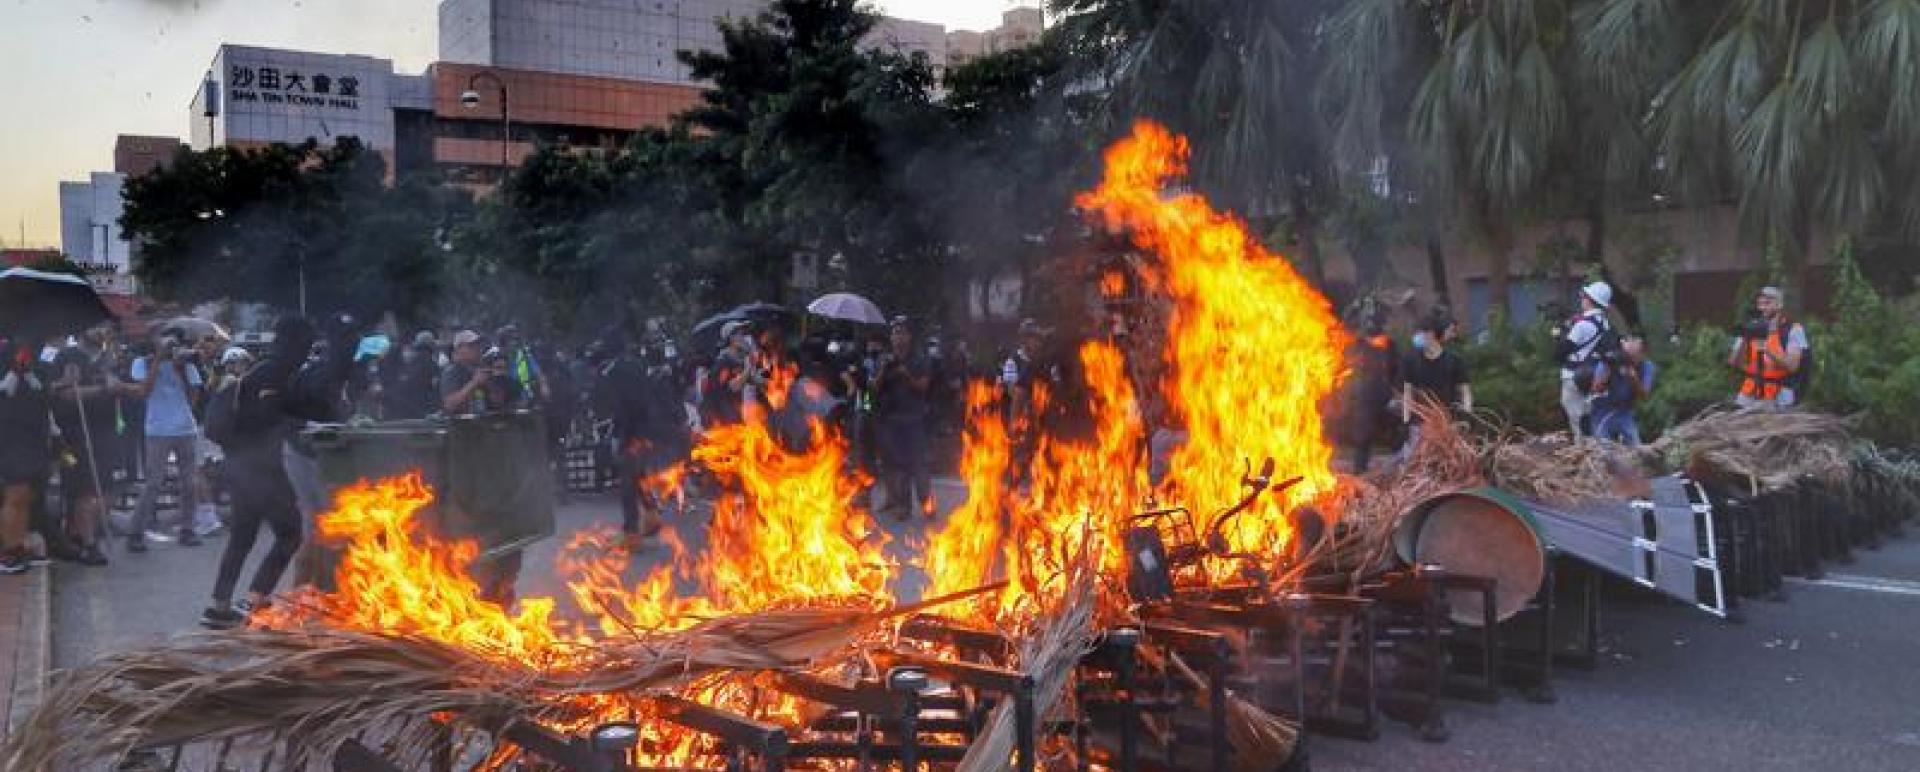 Rioters block roads and set fire to barricades in Sha Tin on Sunday. They also vandalized Sha Tin MTR station, disrupted businesses and damaged facilities at a shopping mall. CHINA DAILY